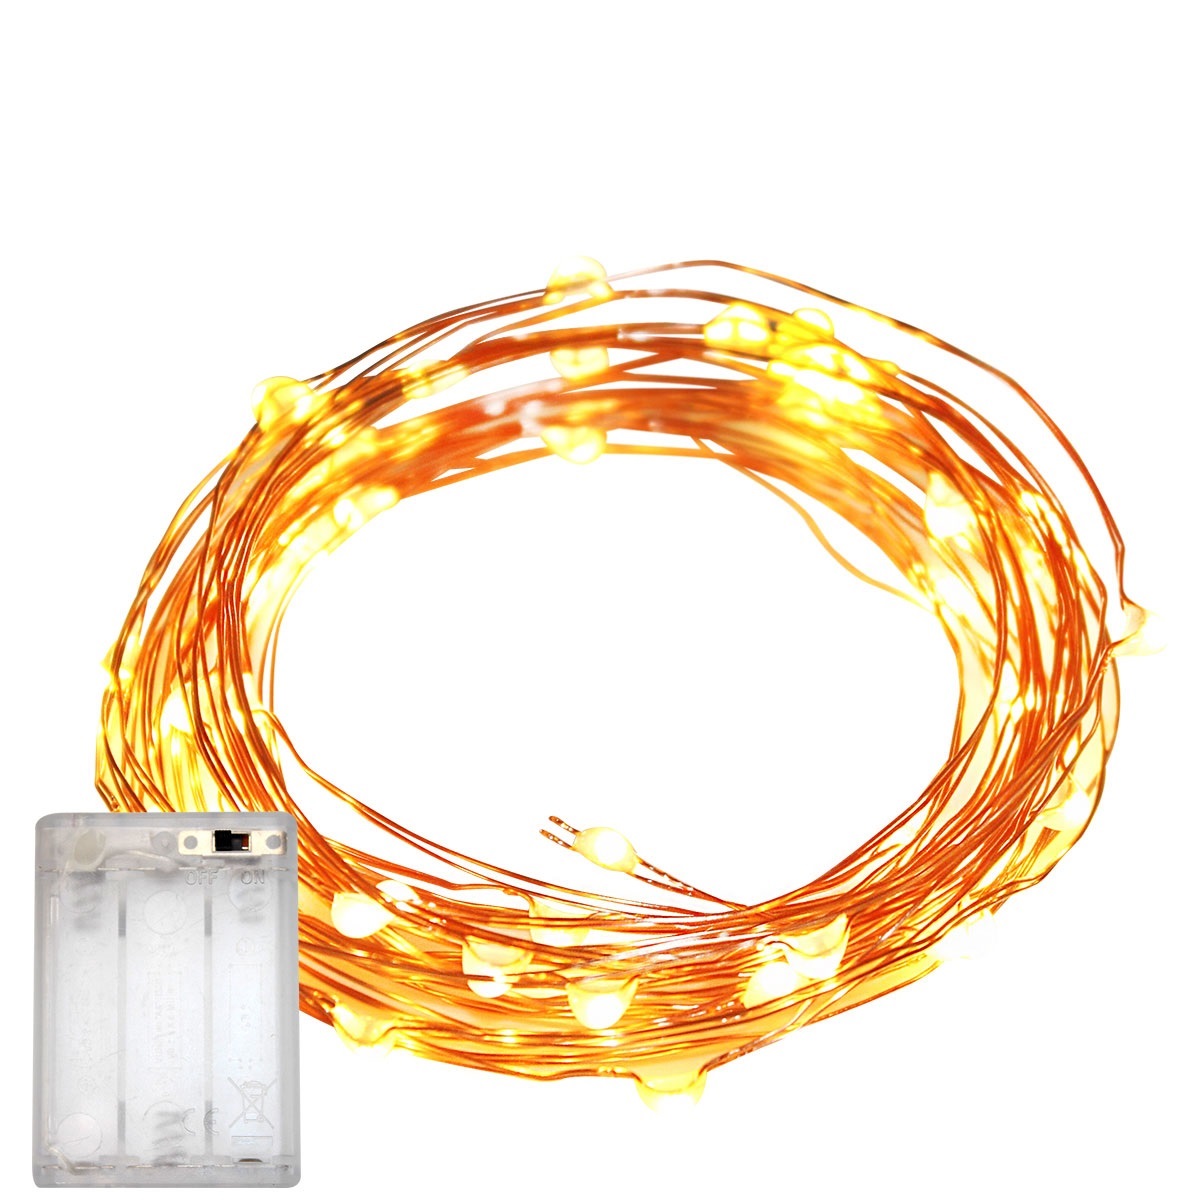 LED LIGHT STRIP WITH CONNECTOR CABLE-300 LUMENS-2700K-NEWAGE-INTERIOR LIGHTING